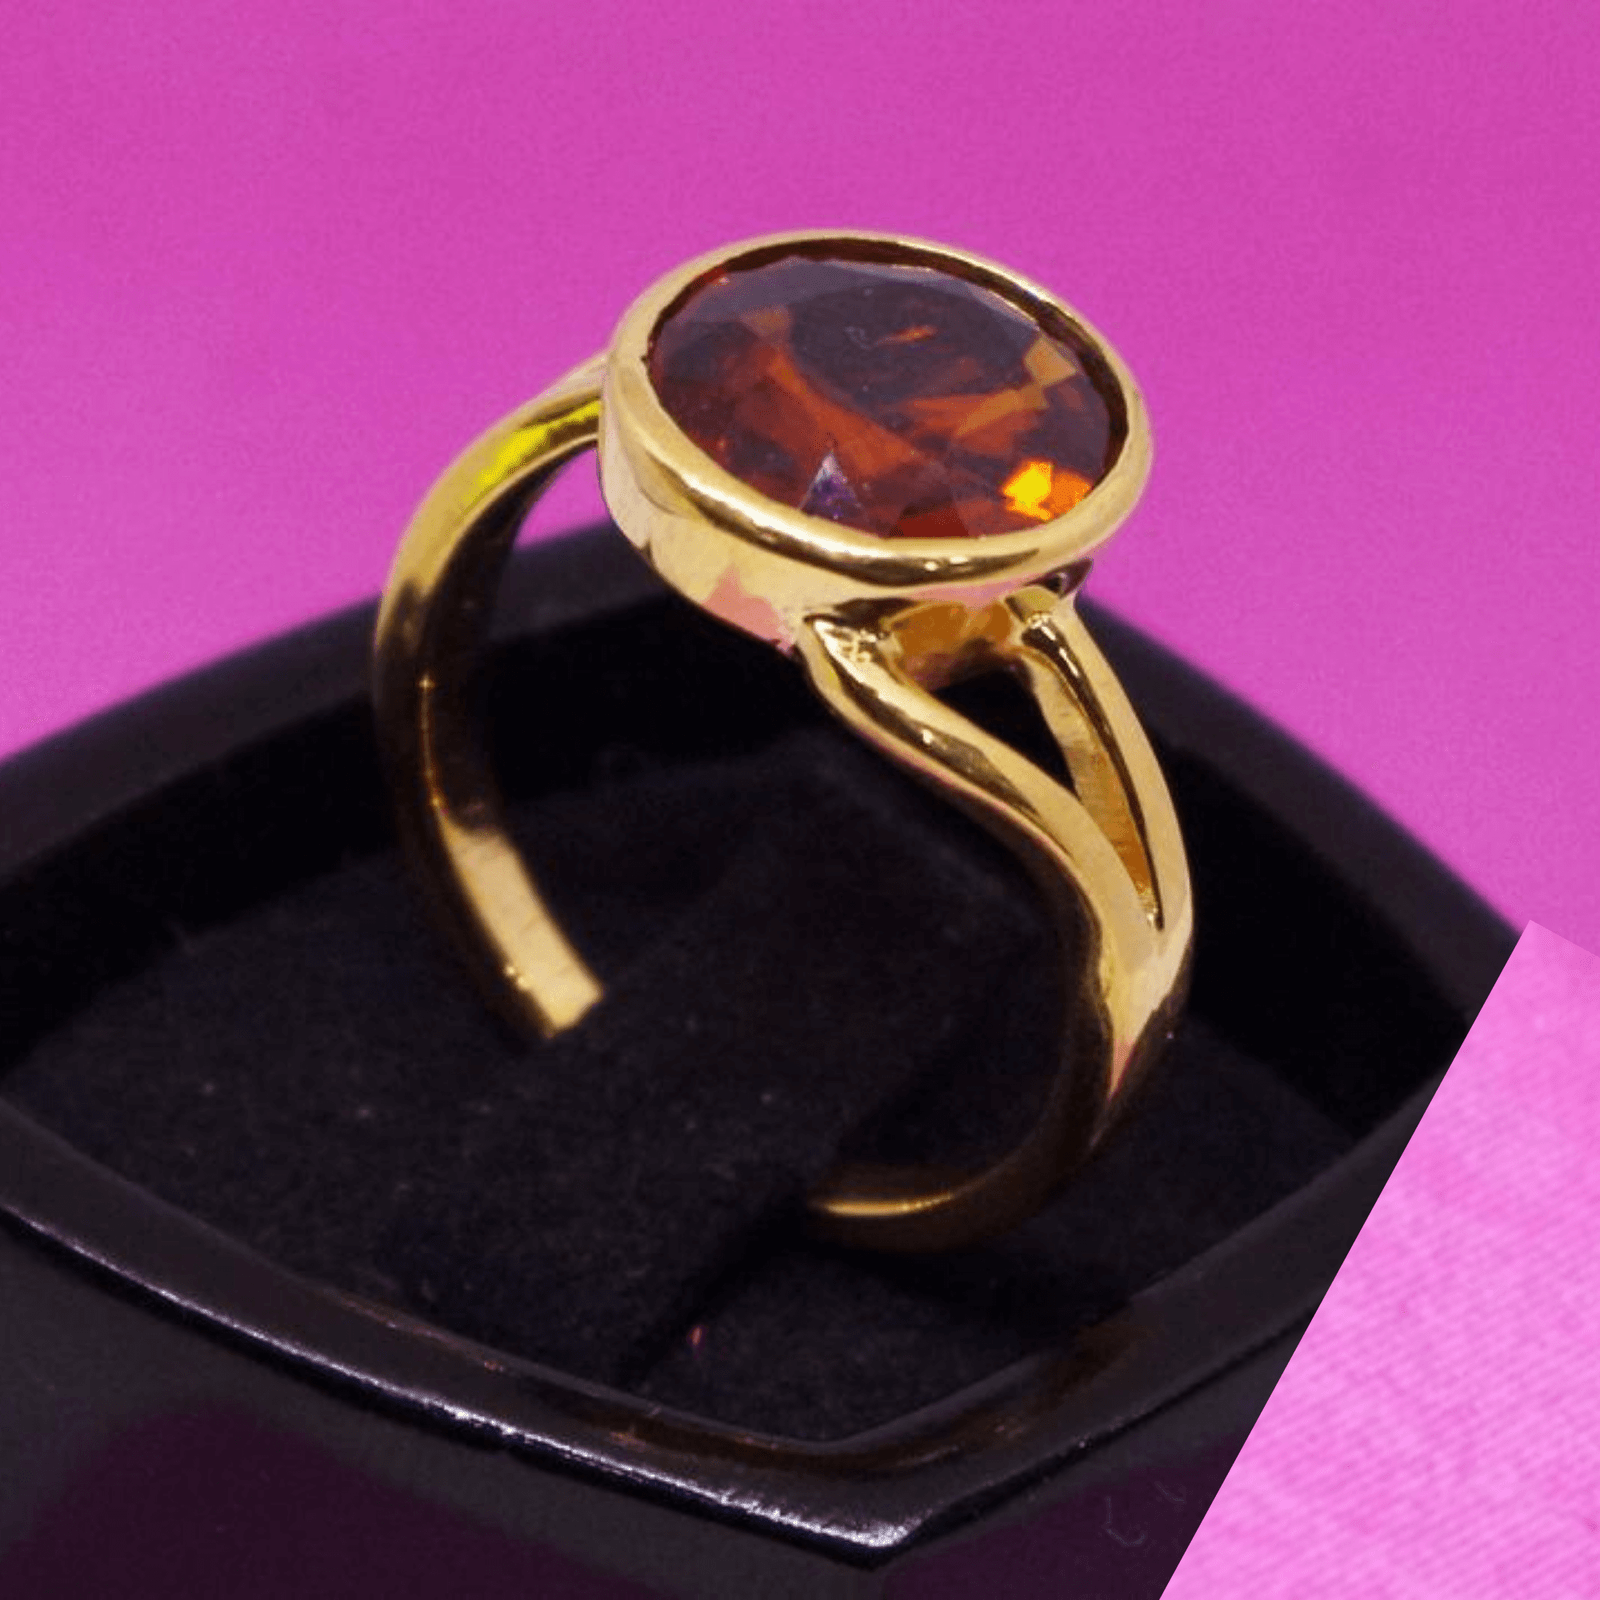 Fantastic Quality 92.5 Sterling Silver 2.9 Gram Women Ring Natural Hessonite  Garnet Gemstone Oval Shape Jewelry Ring Beautiful Gomed Ring - Etsy |  Gemstones, Women rings, Garnet gemstone